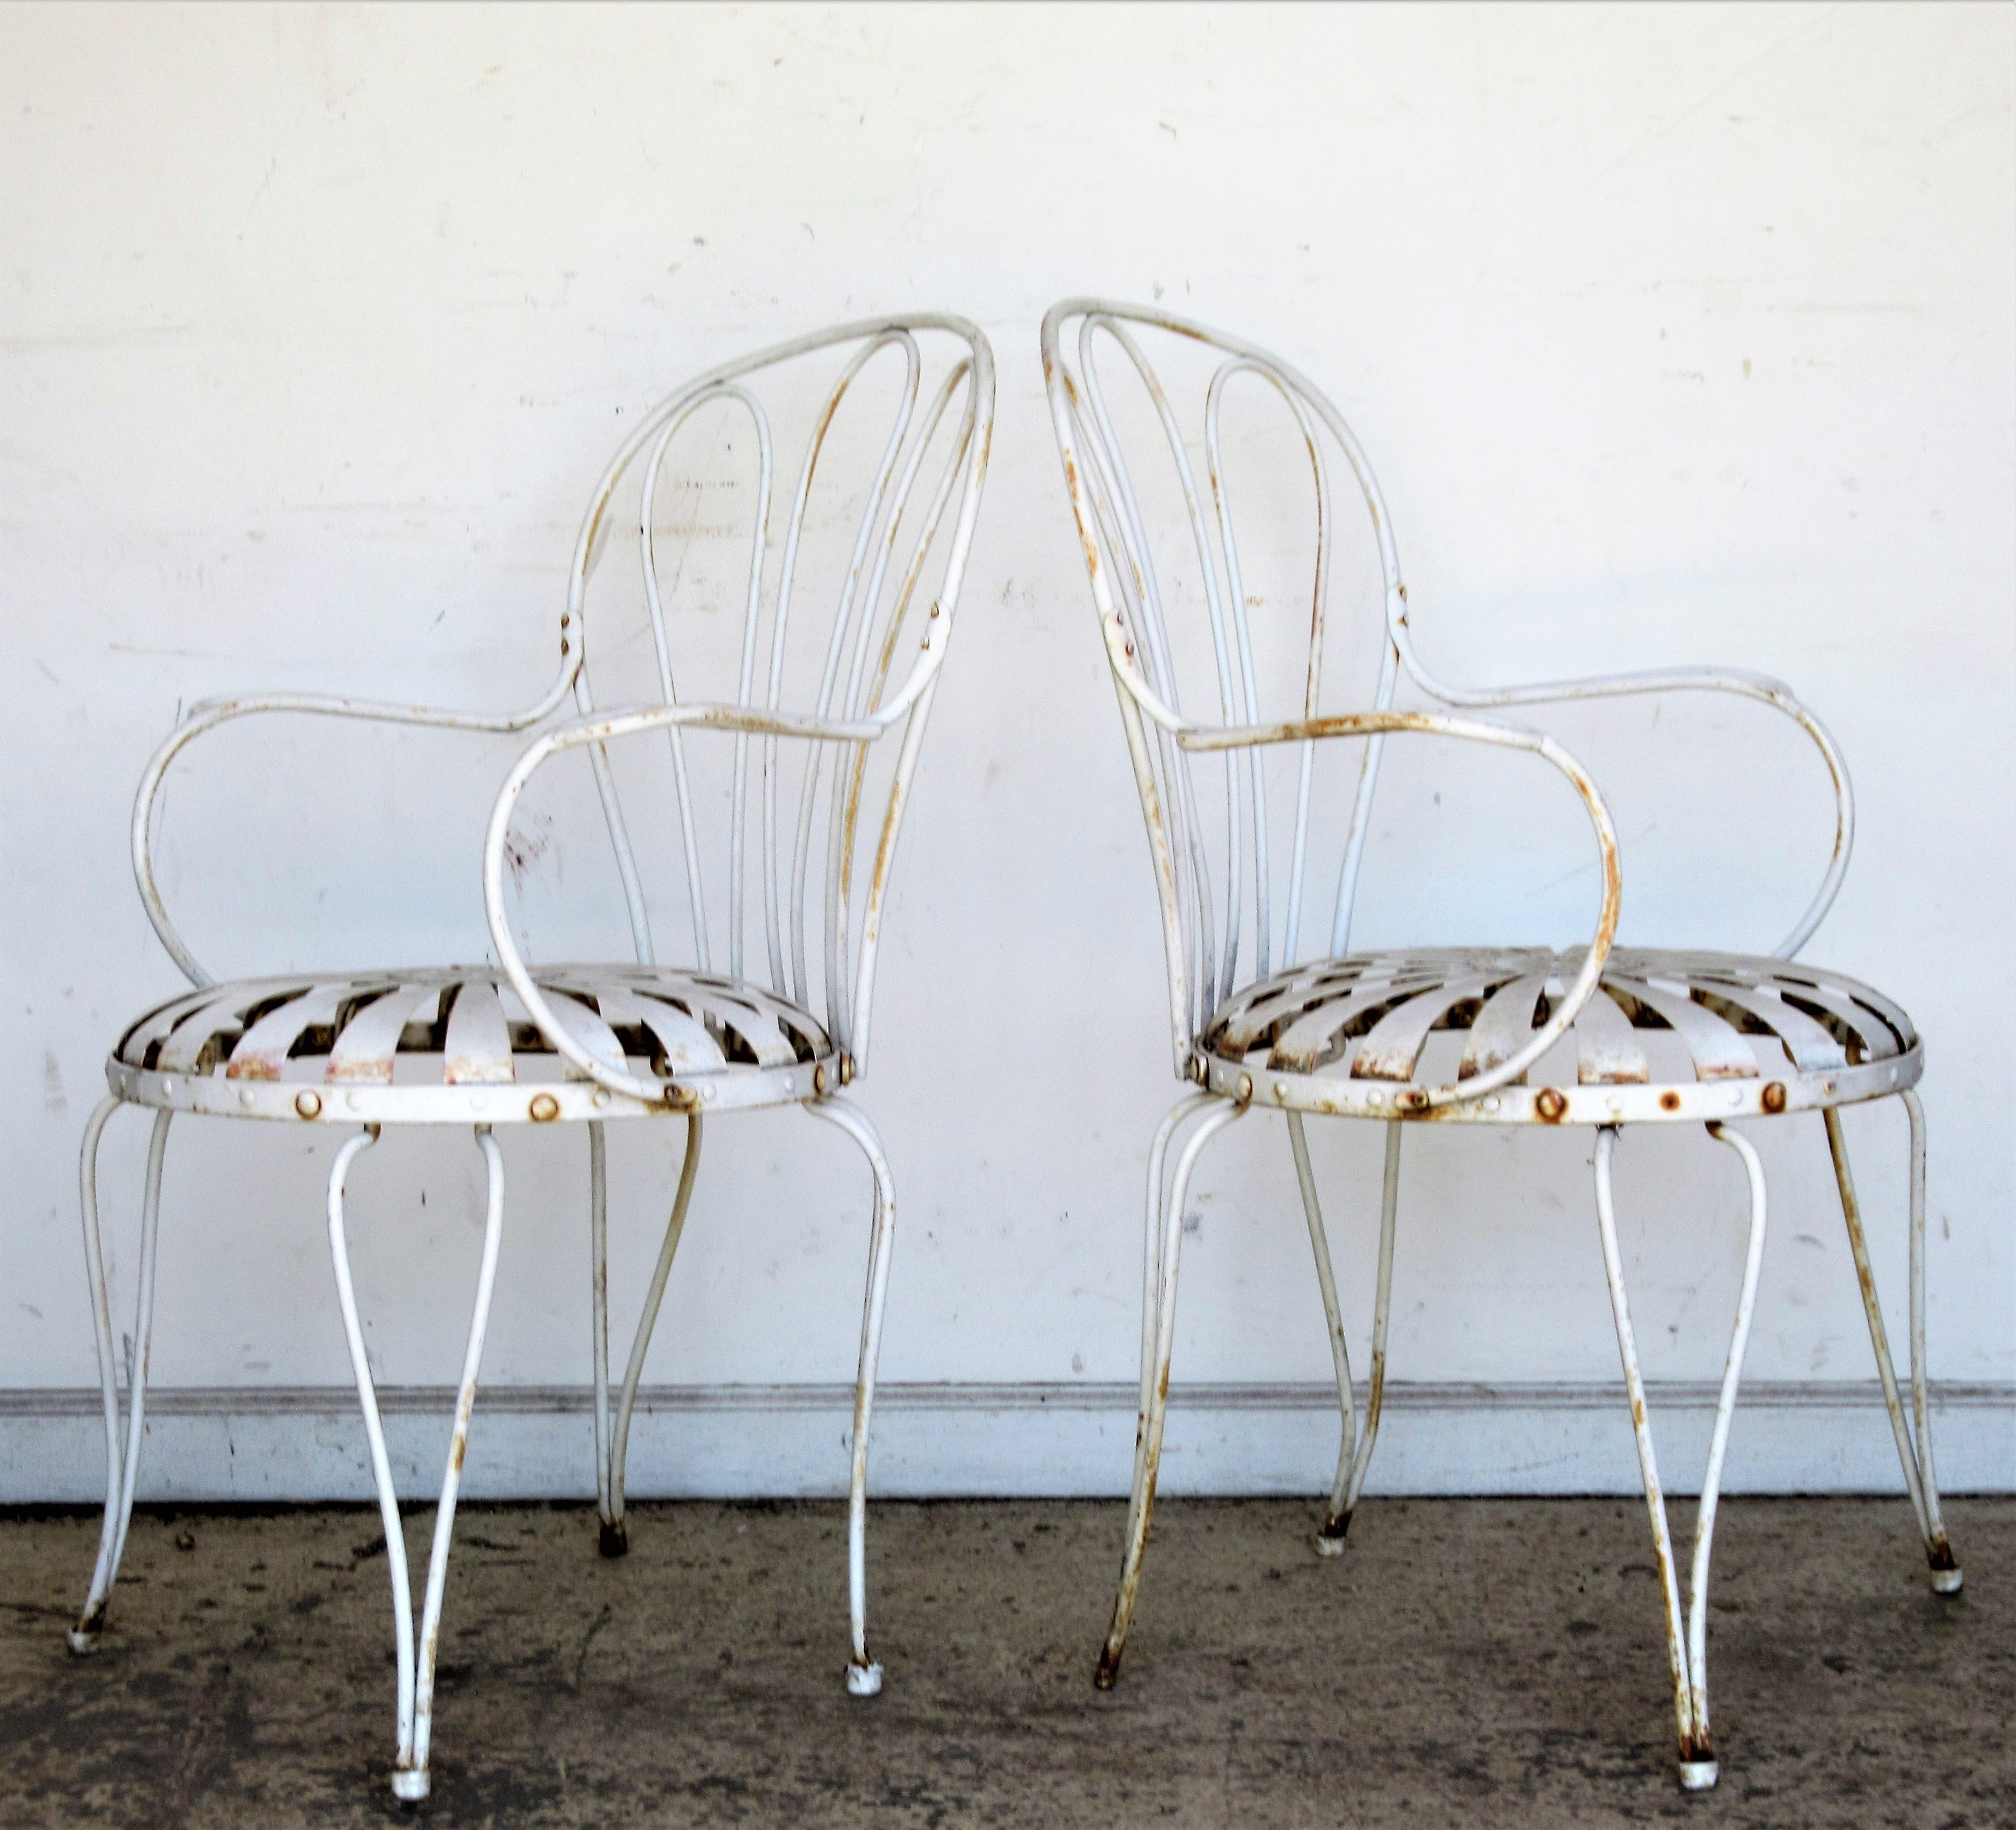 Francois Carre Iron Garden Chairs 2